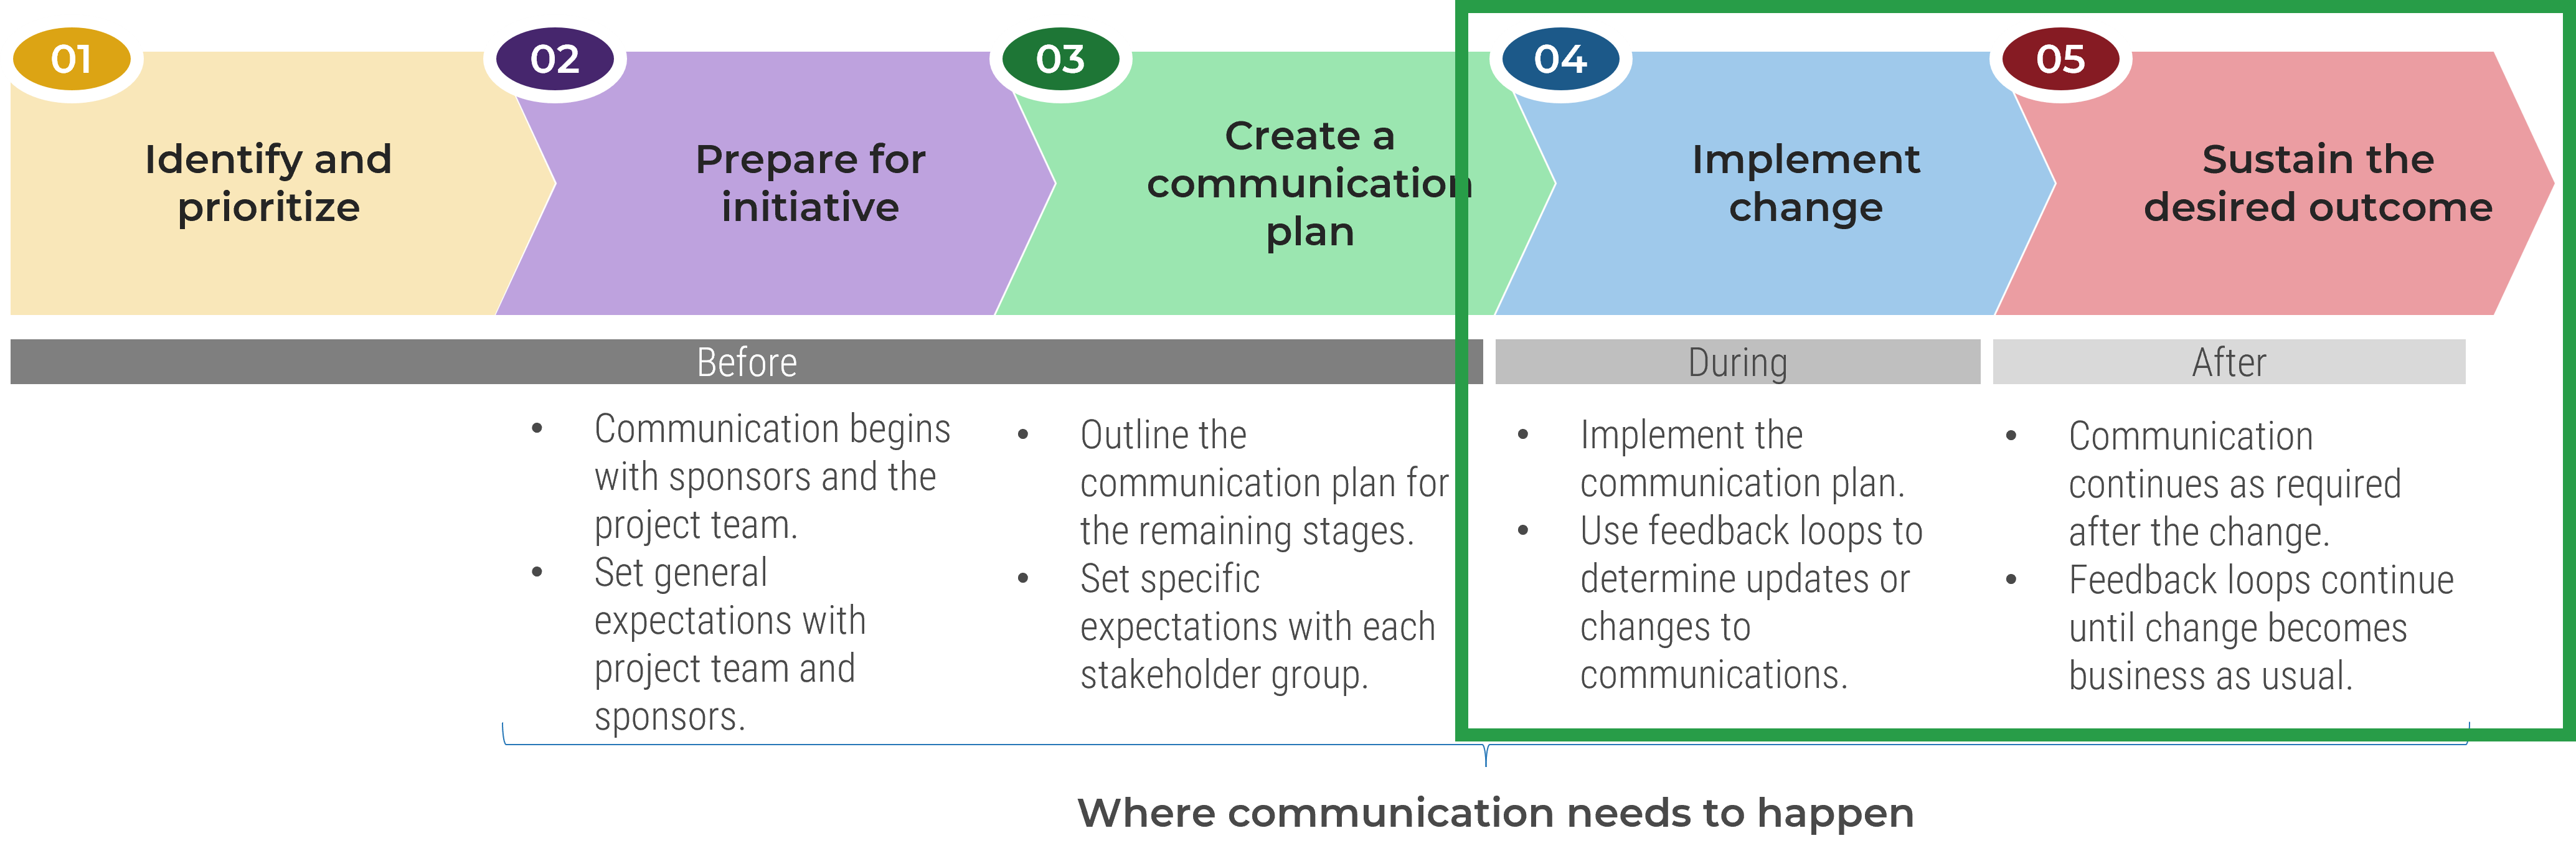 An image of the five steps, with steps four and five highlighted in a green box. The five headings are: Identify and Prioritize; Prepare for initiative; Create a communication plan; Implement change; Sustain the desired outcome